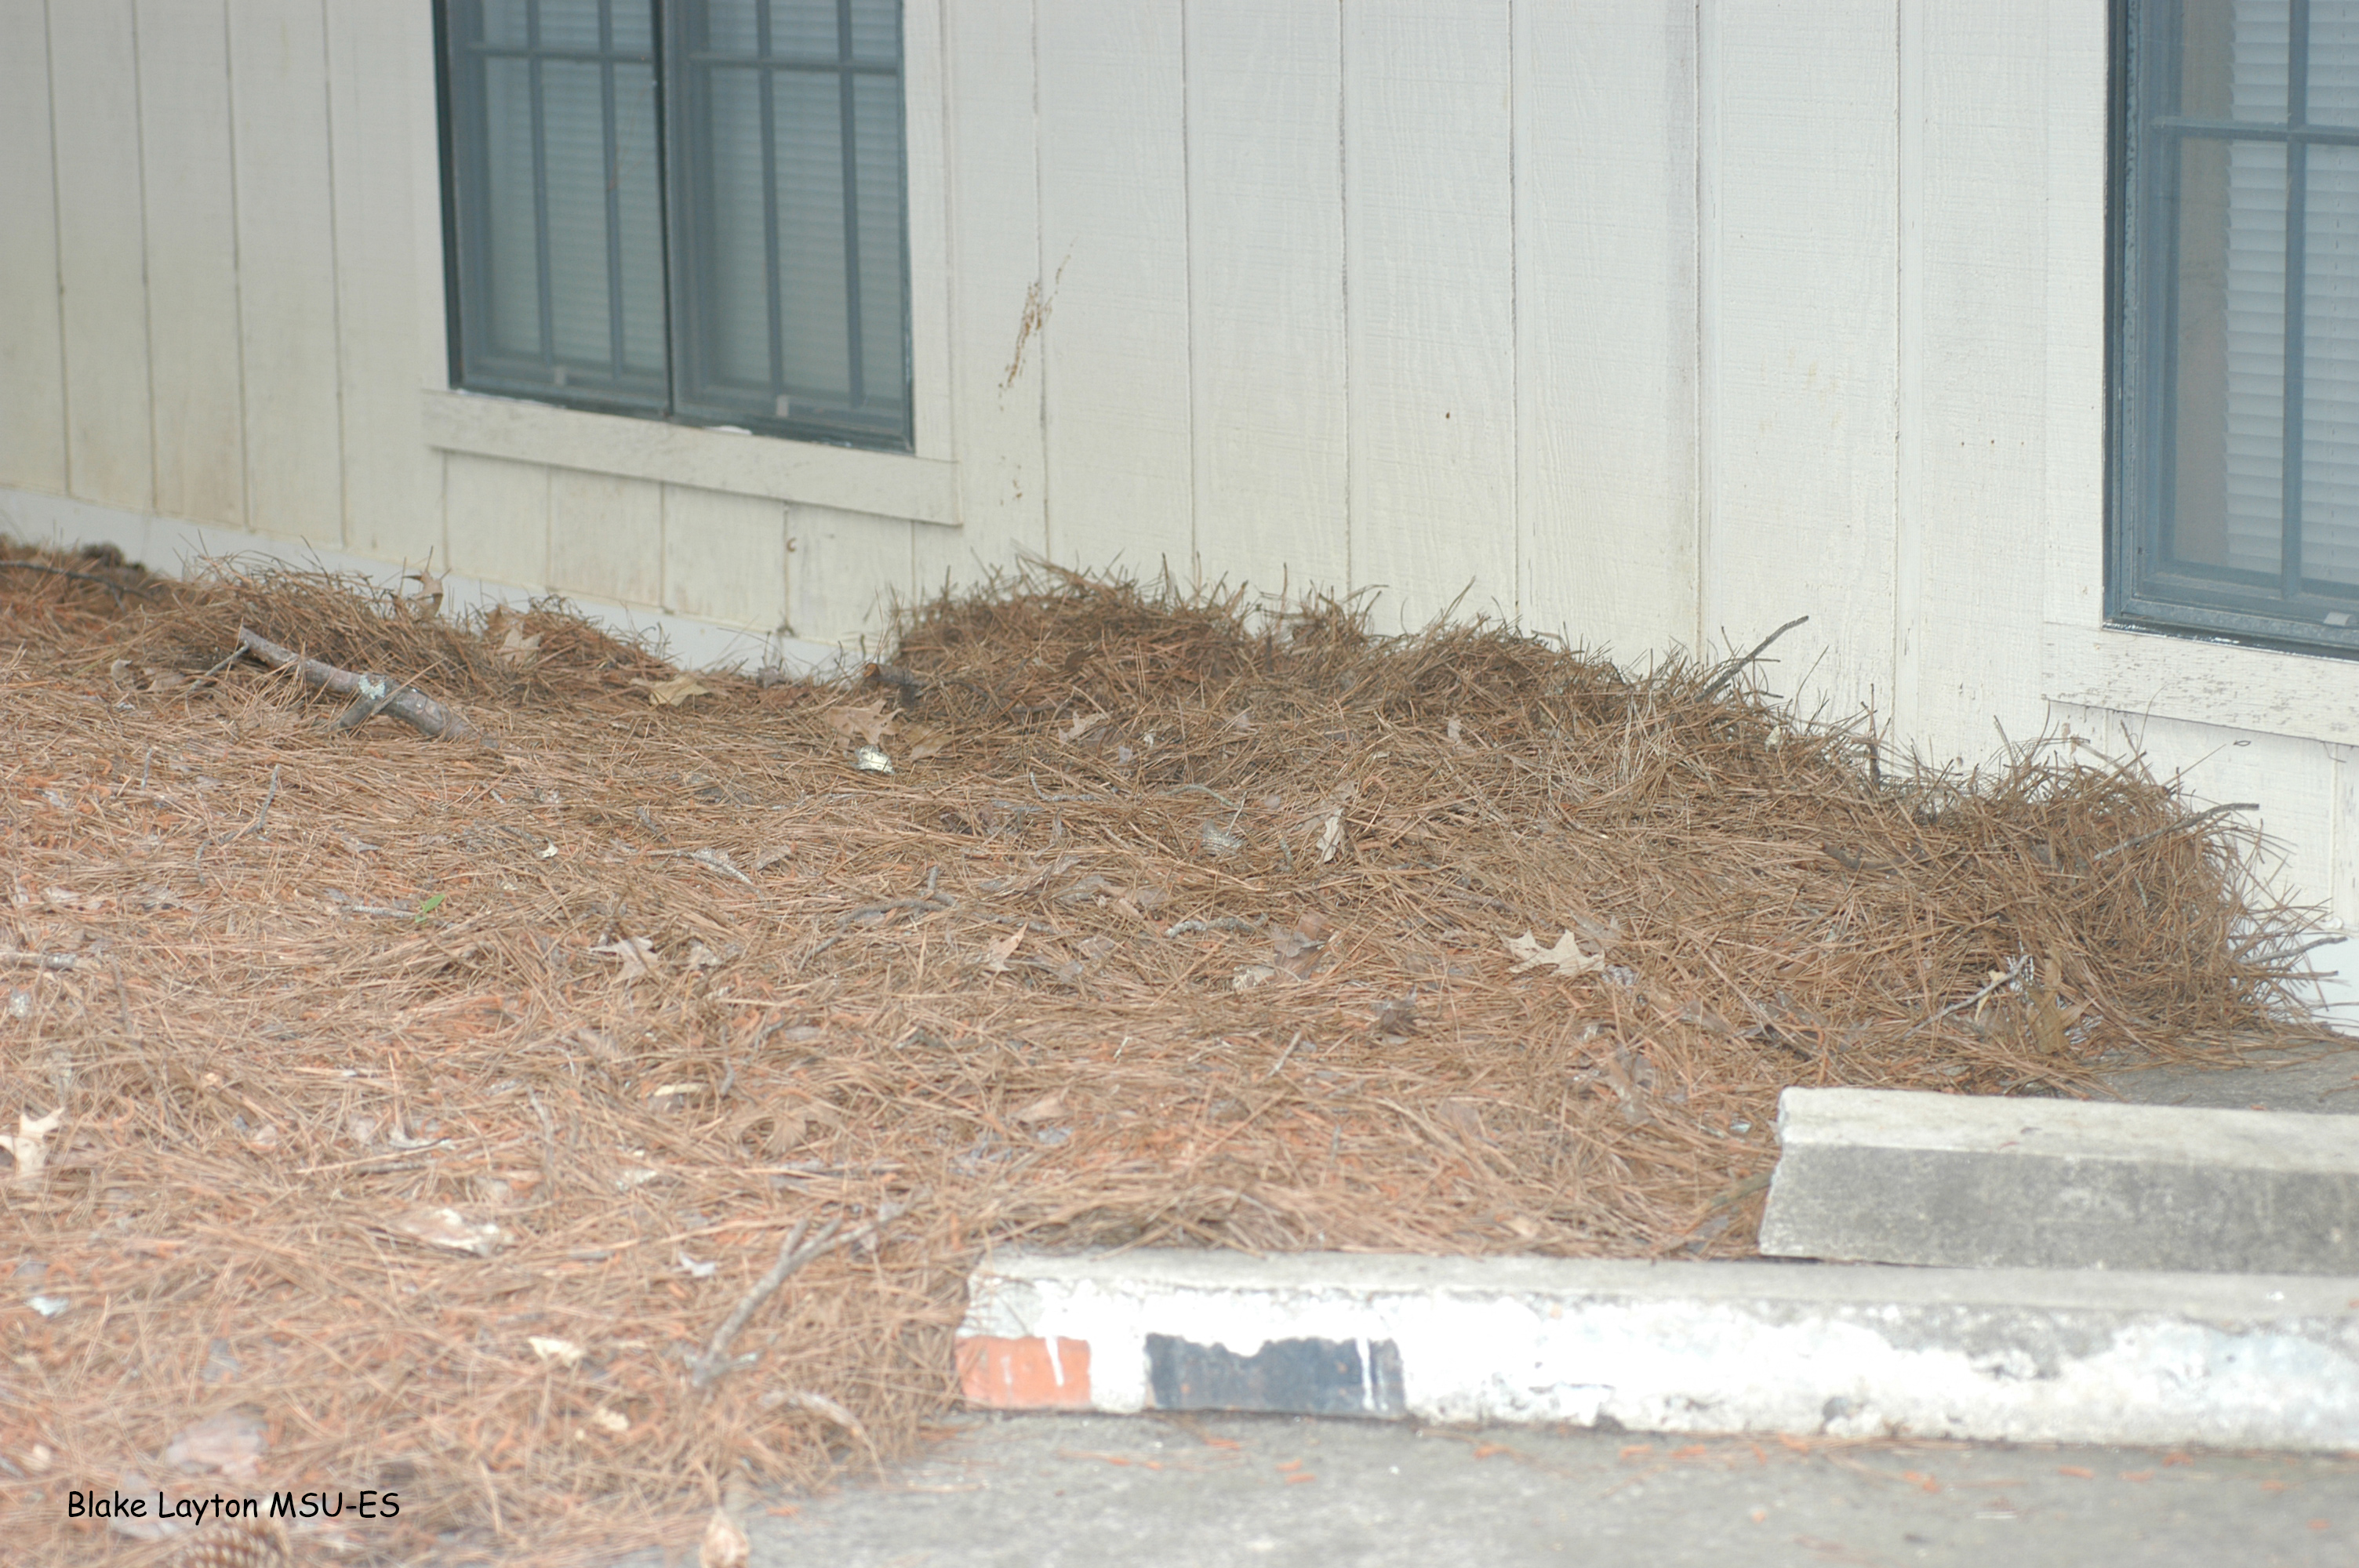 Organic mulch, such as this pine straw, piled against exterior walls greatly increases risks of termite attack, especially if the material is so thick that it reaches the lower level of siding.  Degrading mulch allows termites to tunnel directly into the building, bypassing any soil-applied insecticide treatments. 